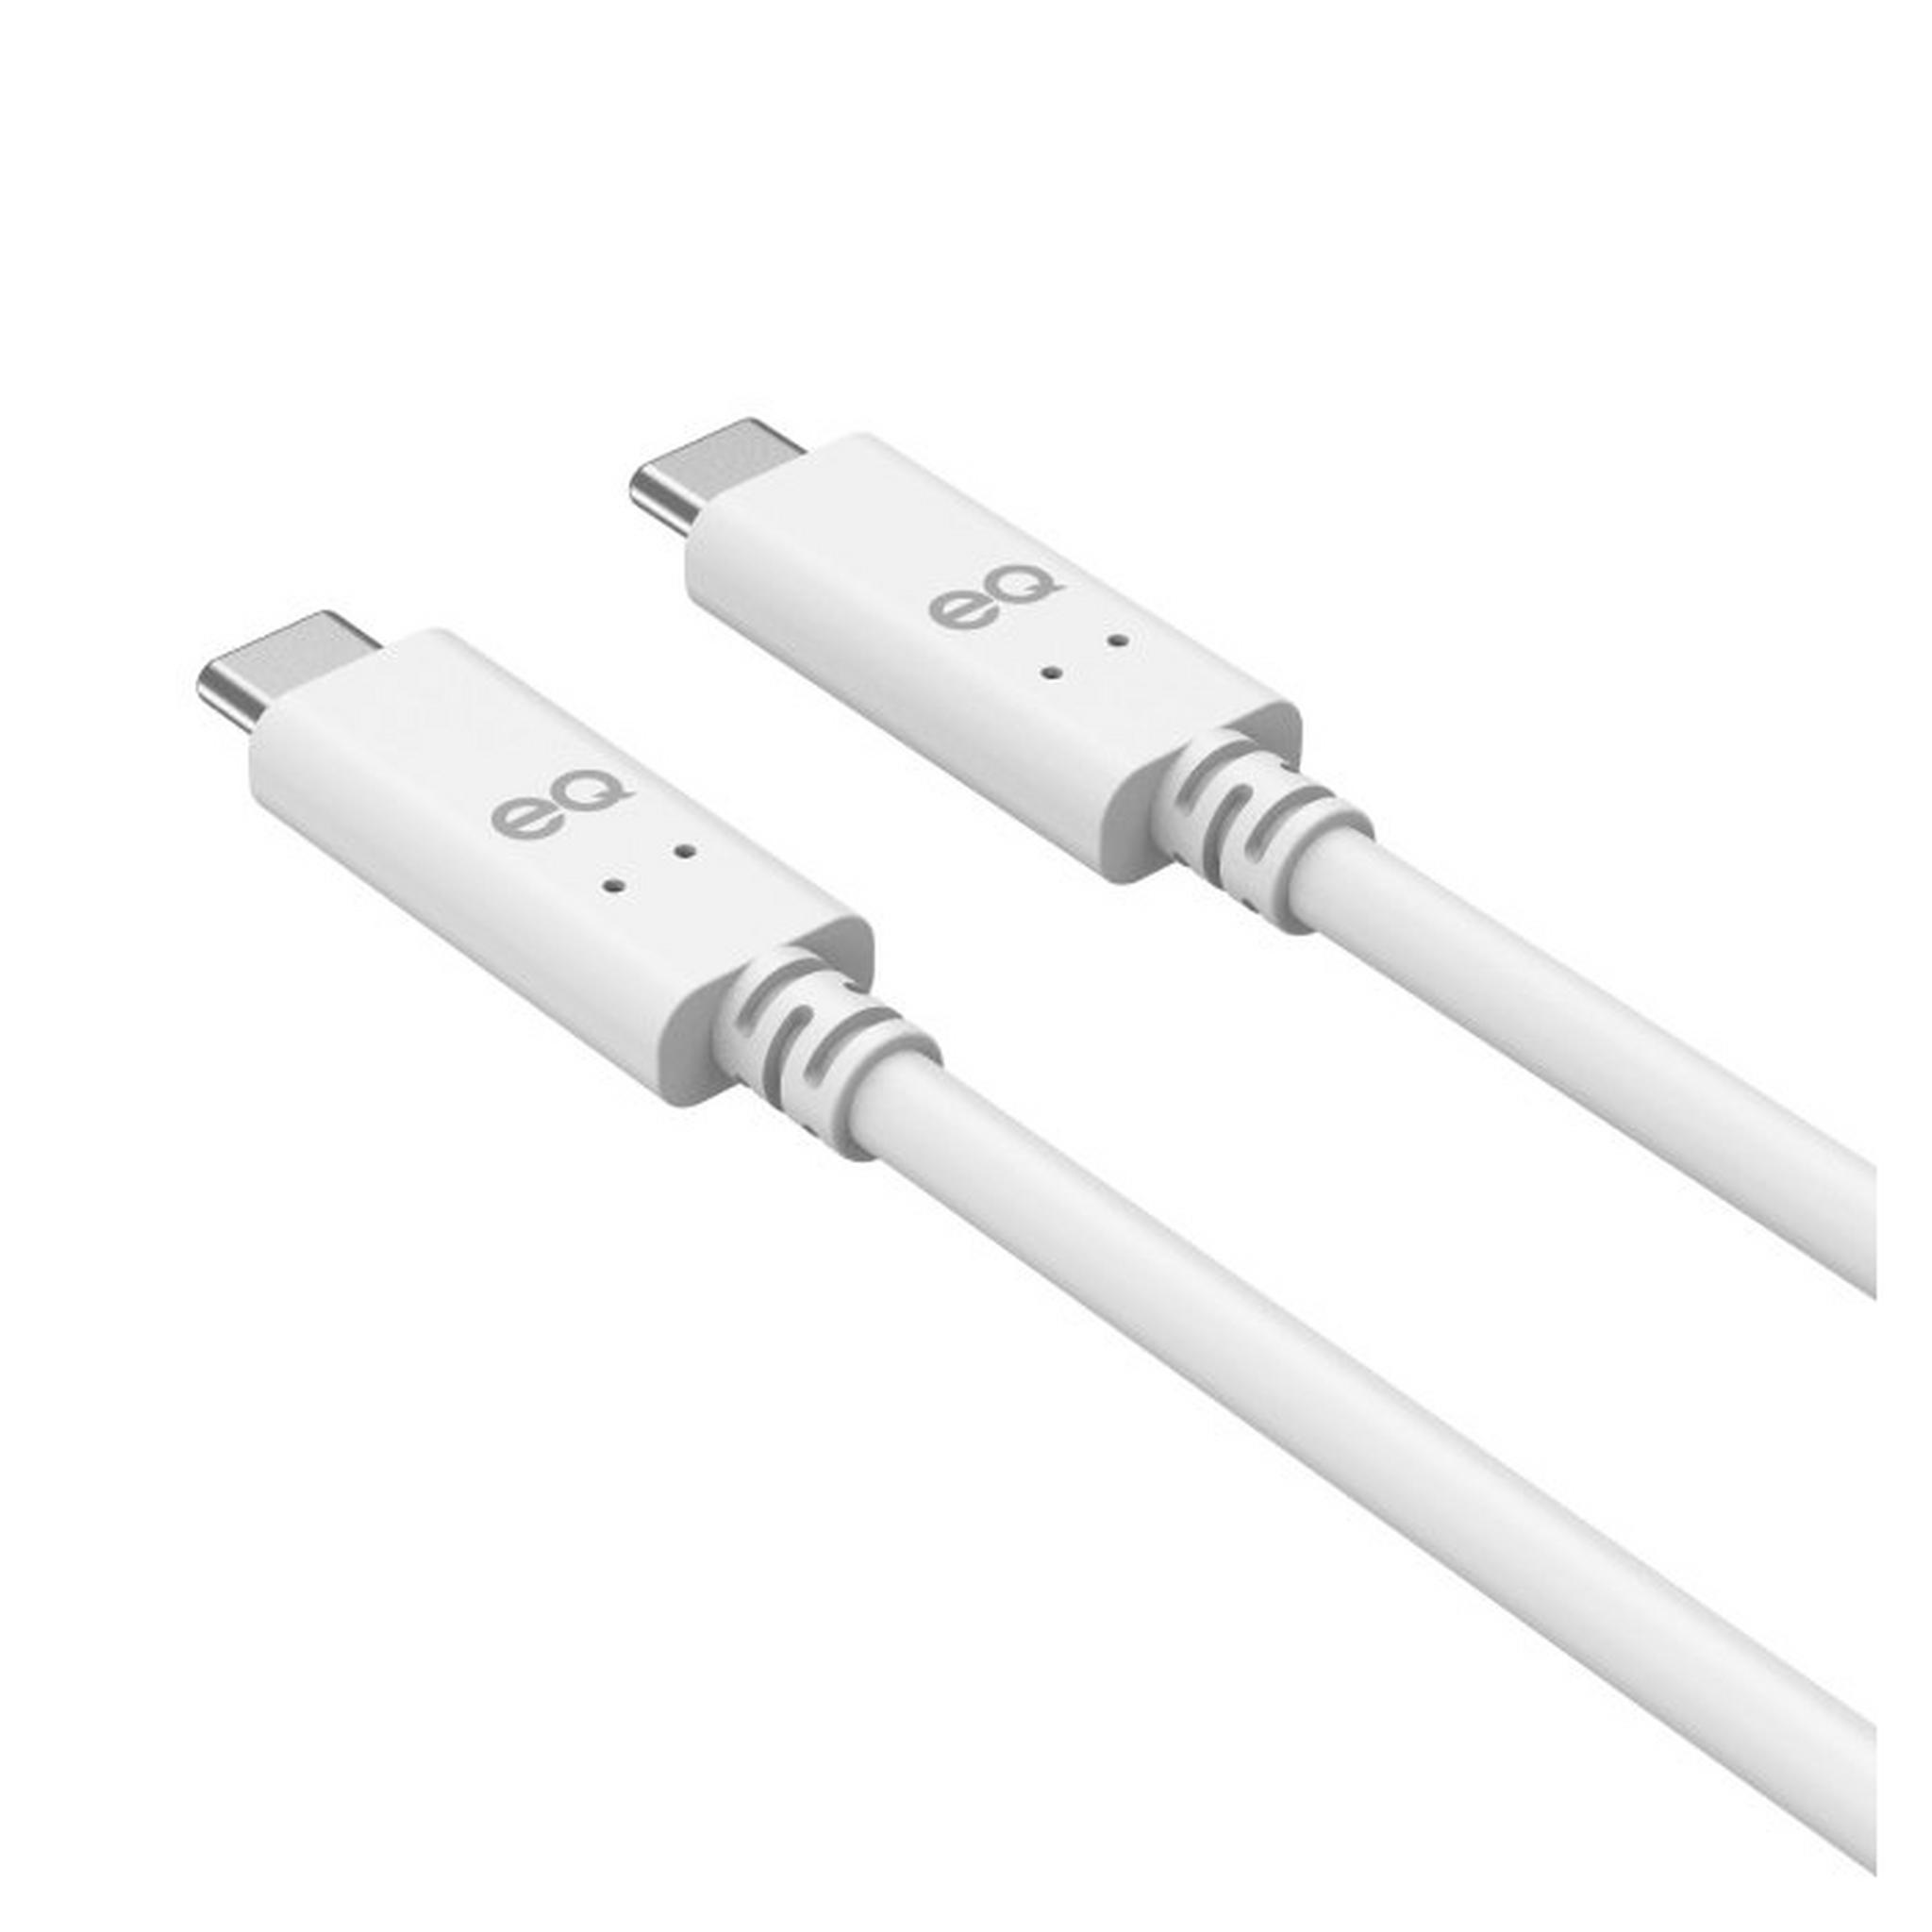 EQ Gen 1 Type-C to C 1M Cable - White